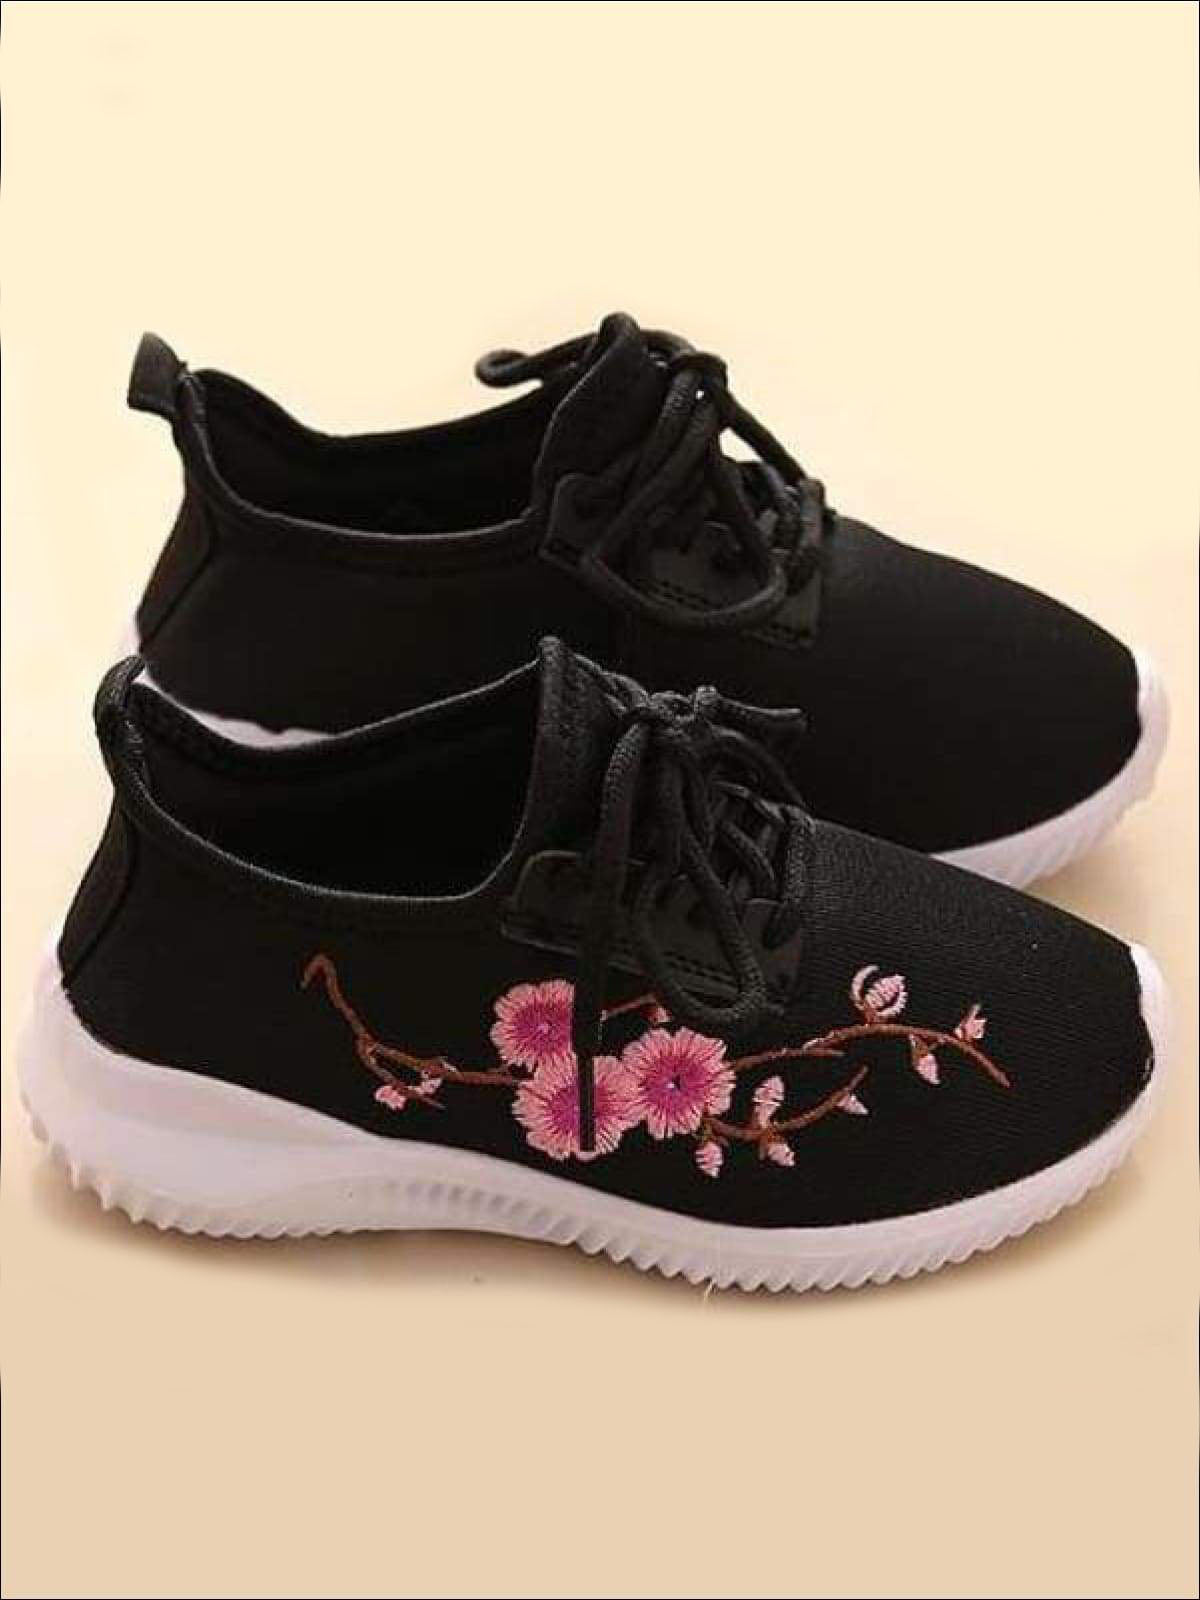 Girls Floral Embroidered Sneakers By Liv and Mia